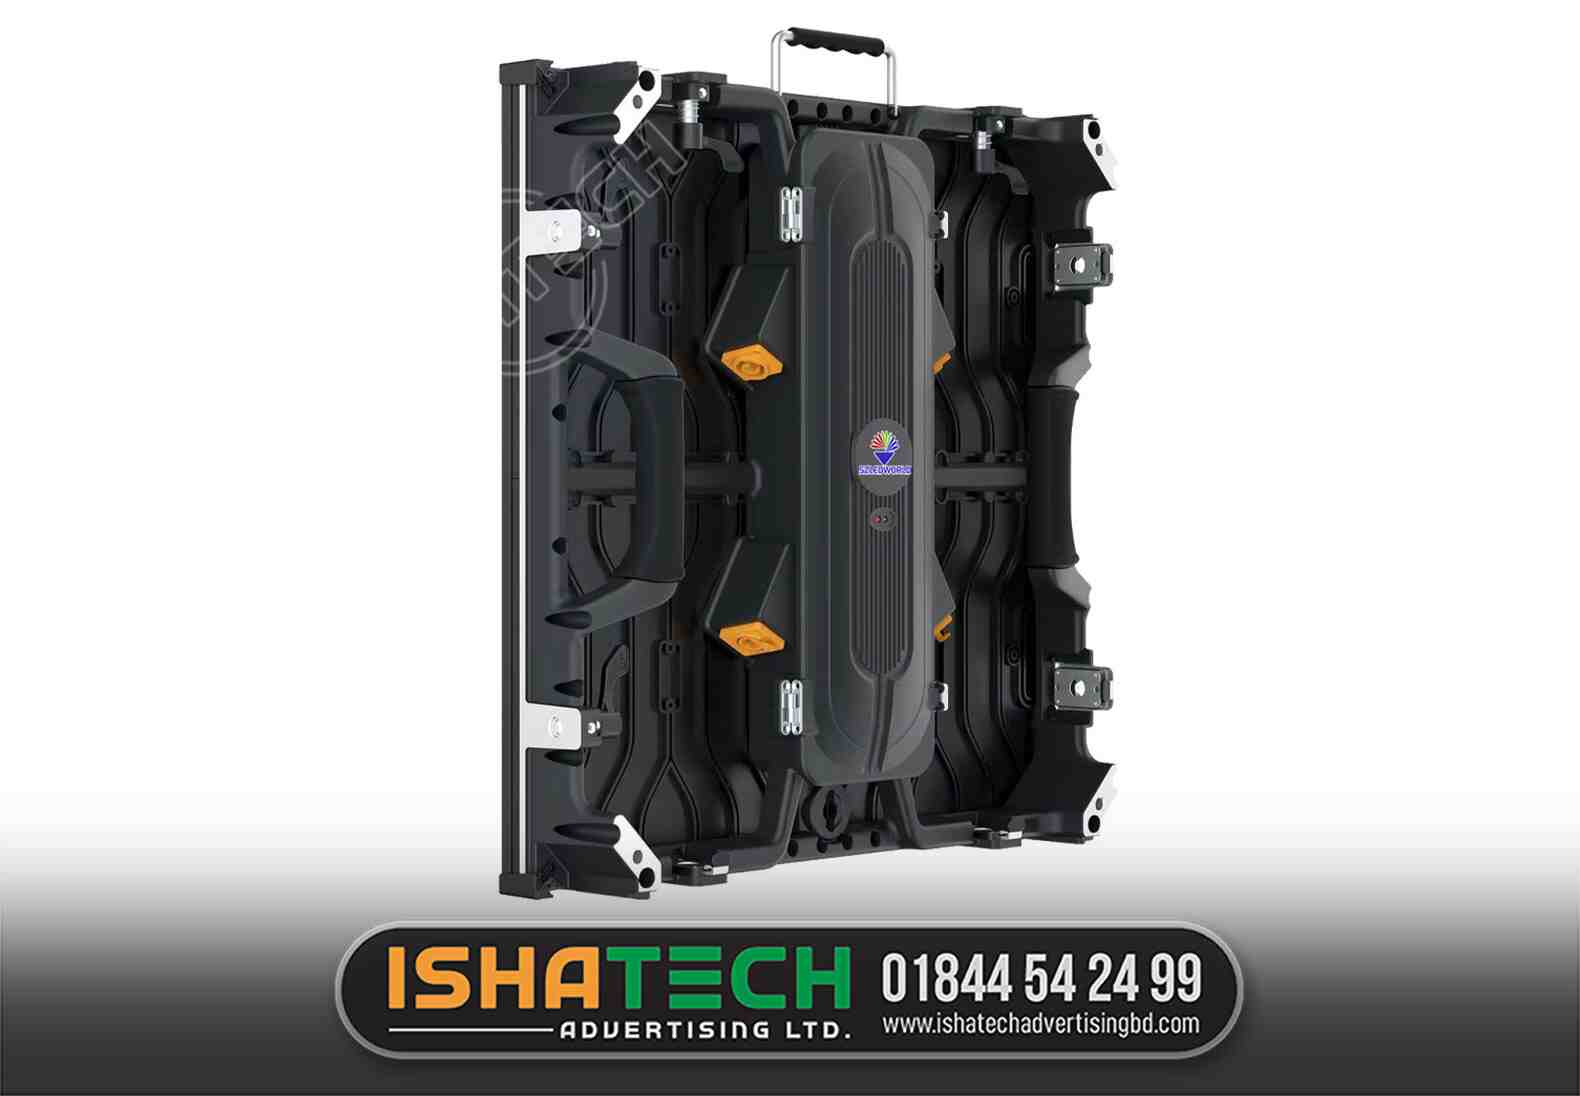 Ishatedh Advertising Ltd is a high performance rental panel for indoor and outdoor applications. It is light and slim and has many creative and user-friendly designs to achieve more convenient and faster installation including fast lock, and carry handles.The screen has high protecting level with front and back service options for quick and easy maintenance.